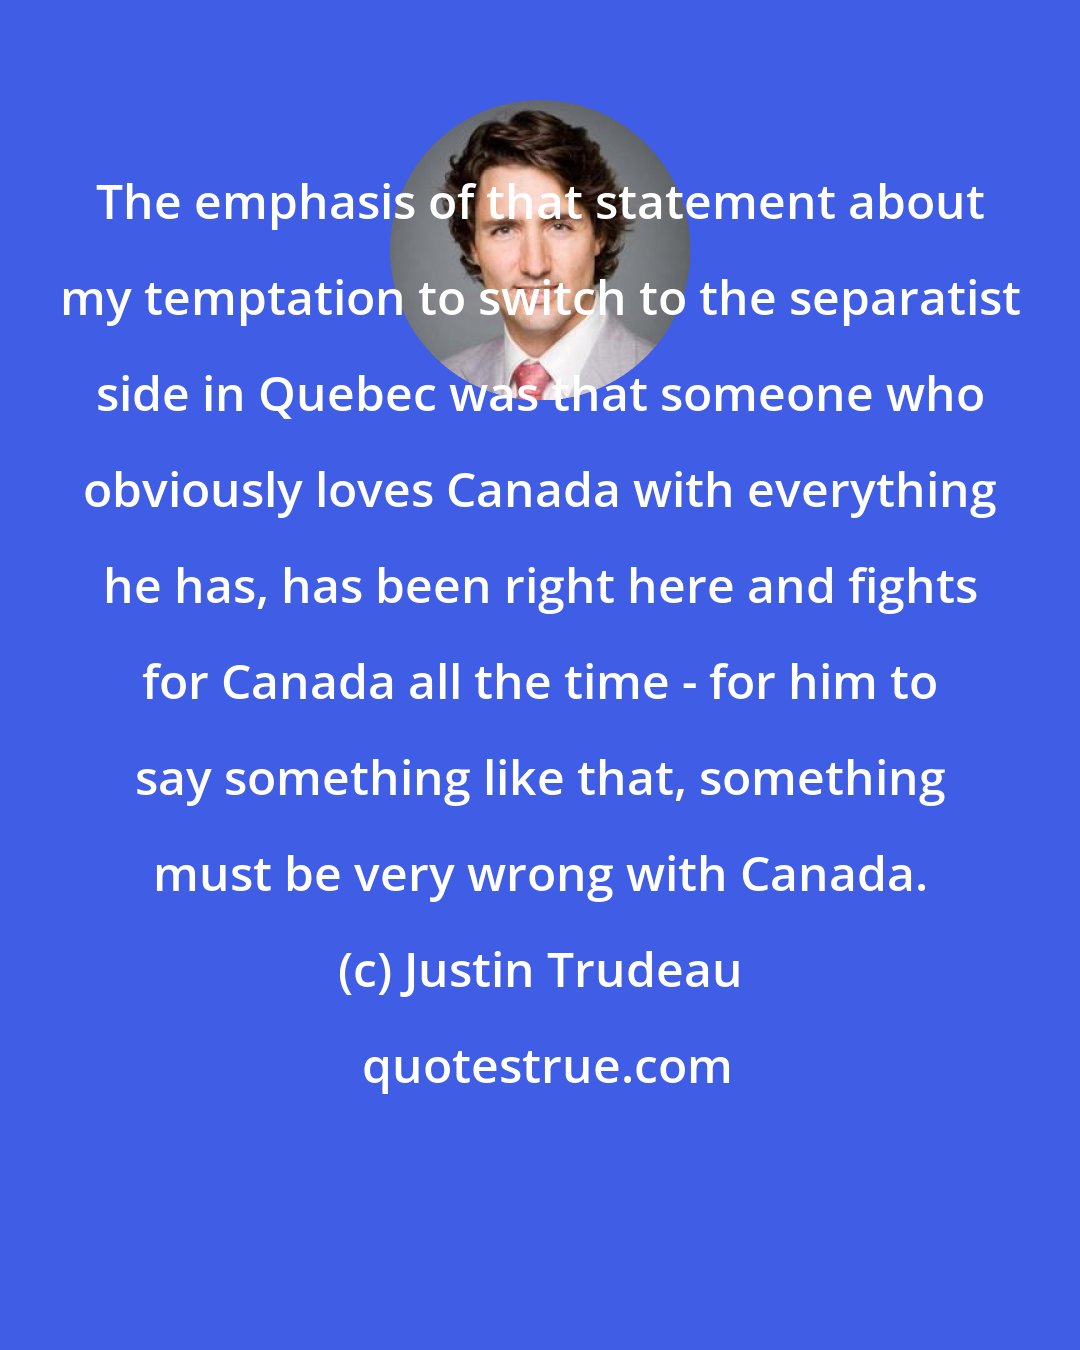 Justin Trudeau: The emphasis of that statement about my temptation to switch to the separatist side in Quebec was that someone who obviously loves Canada with everything he has, has been right here and fights for Canada all the time - for him to say something like that, something must be very wrong with Canada.